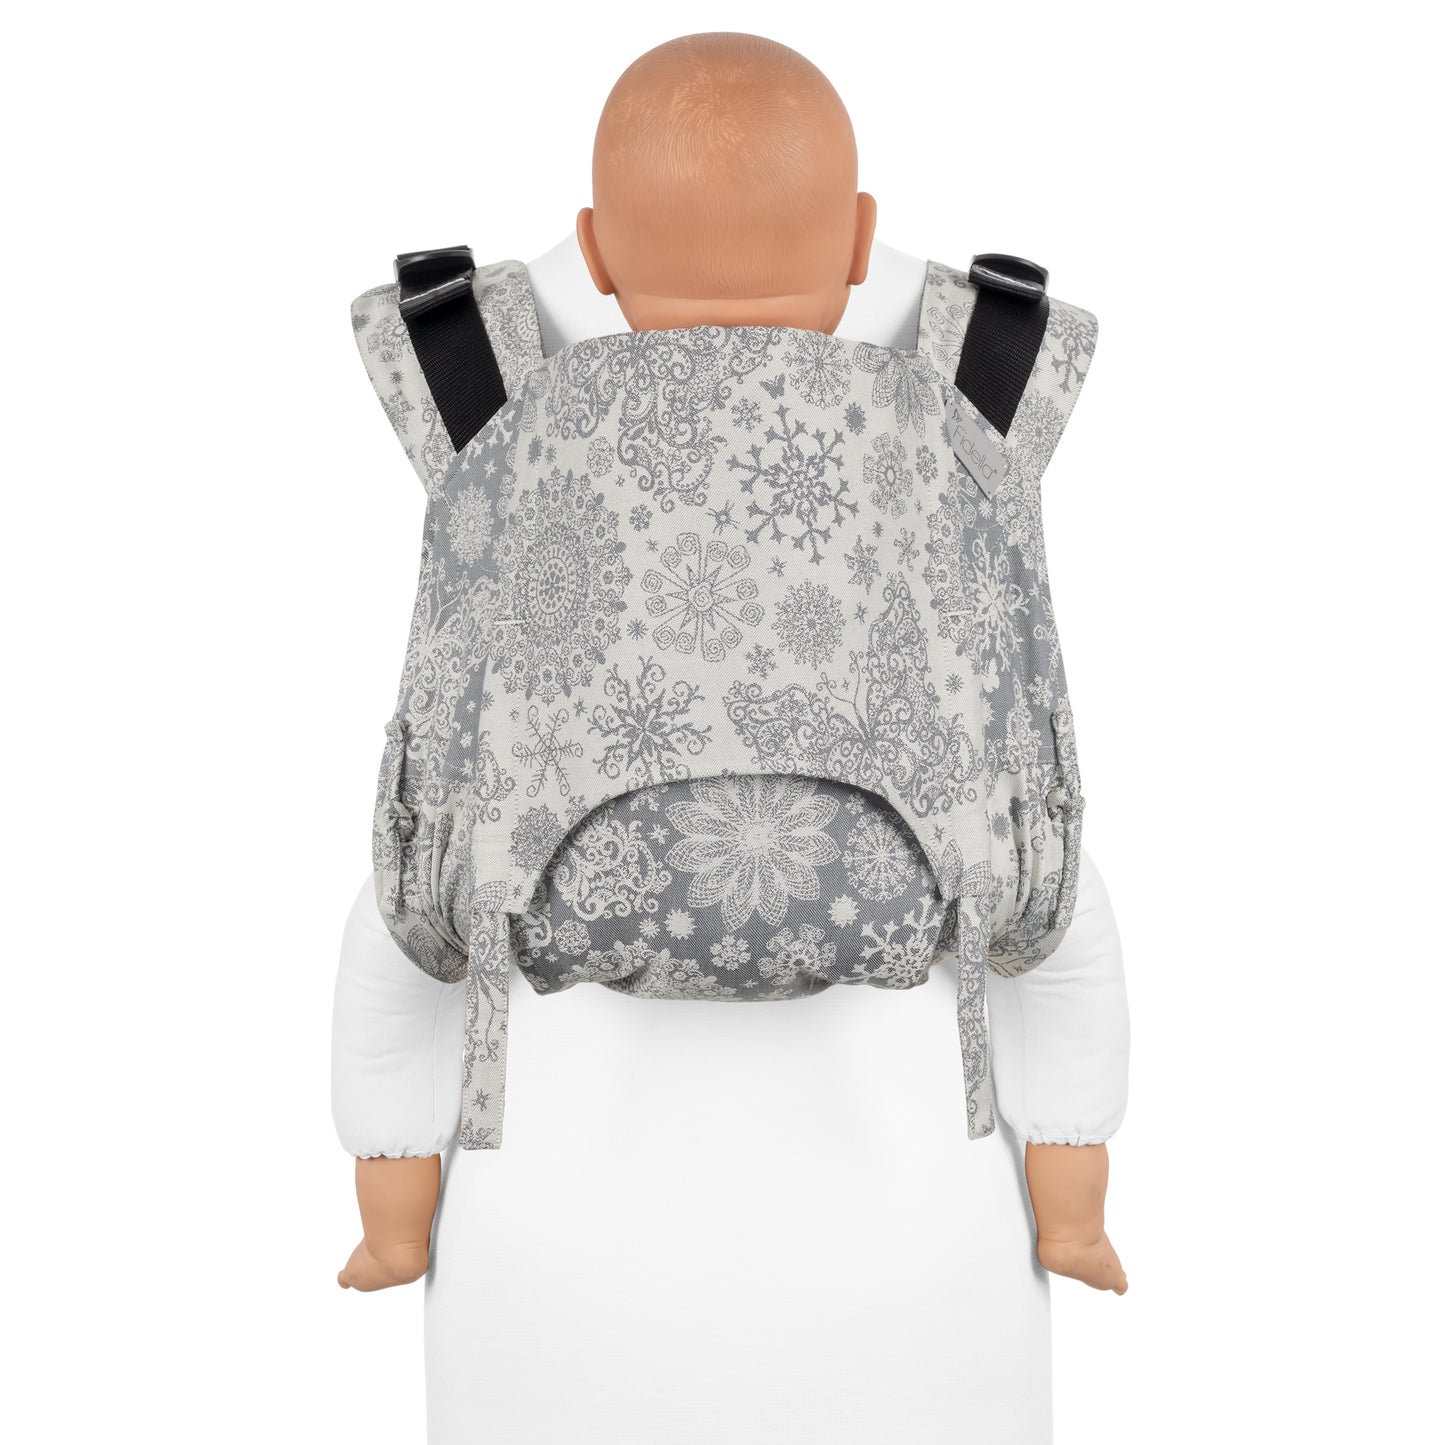 Onbuhimo - Back Carrier - Toddler - Iced Butterfly - smoke